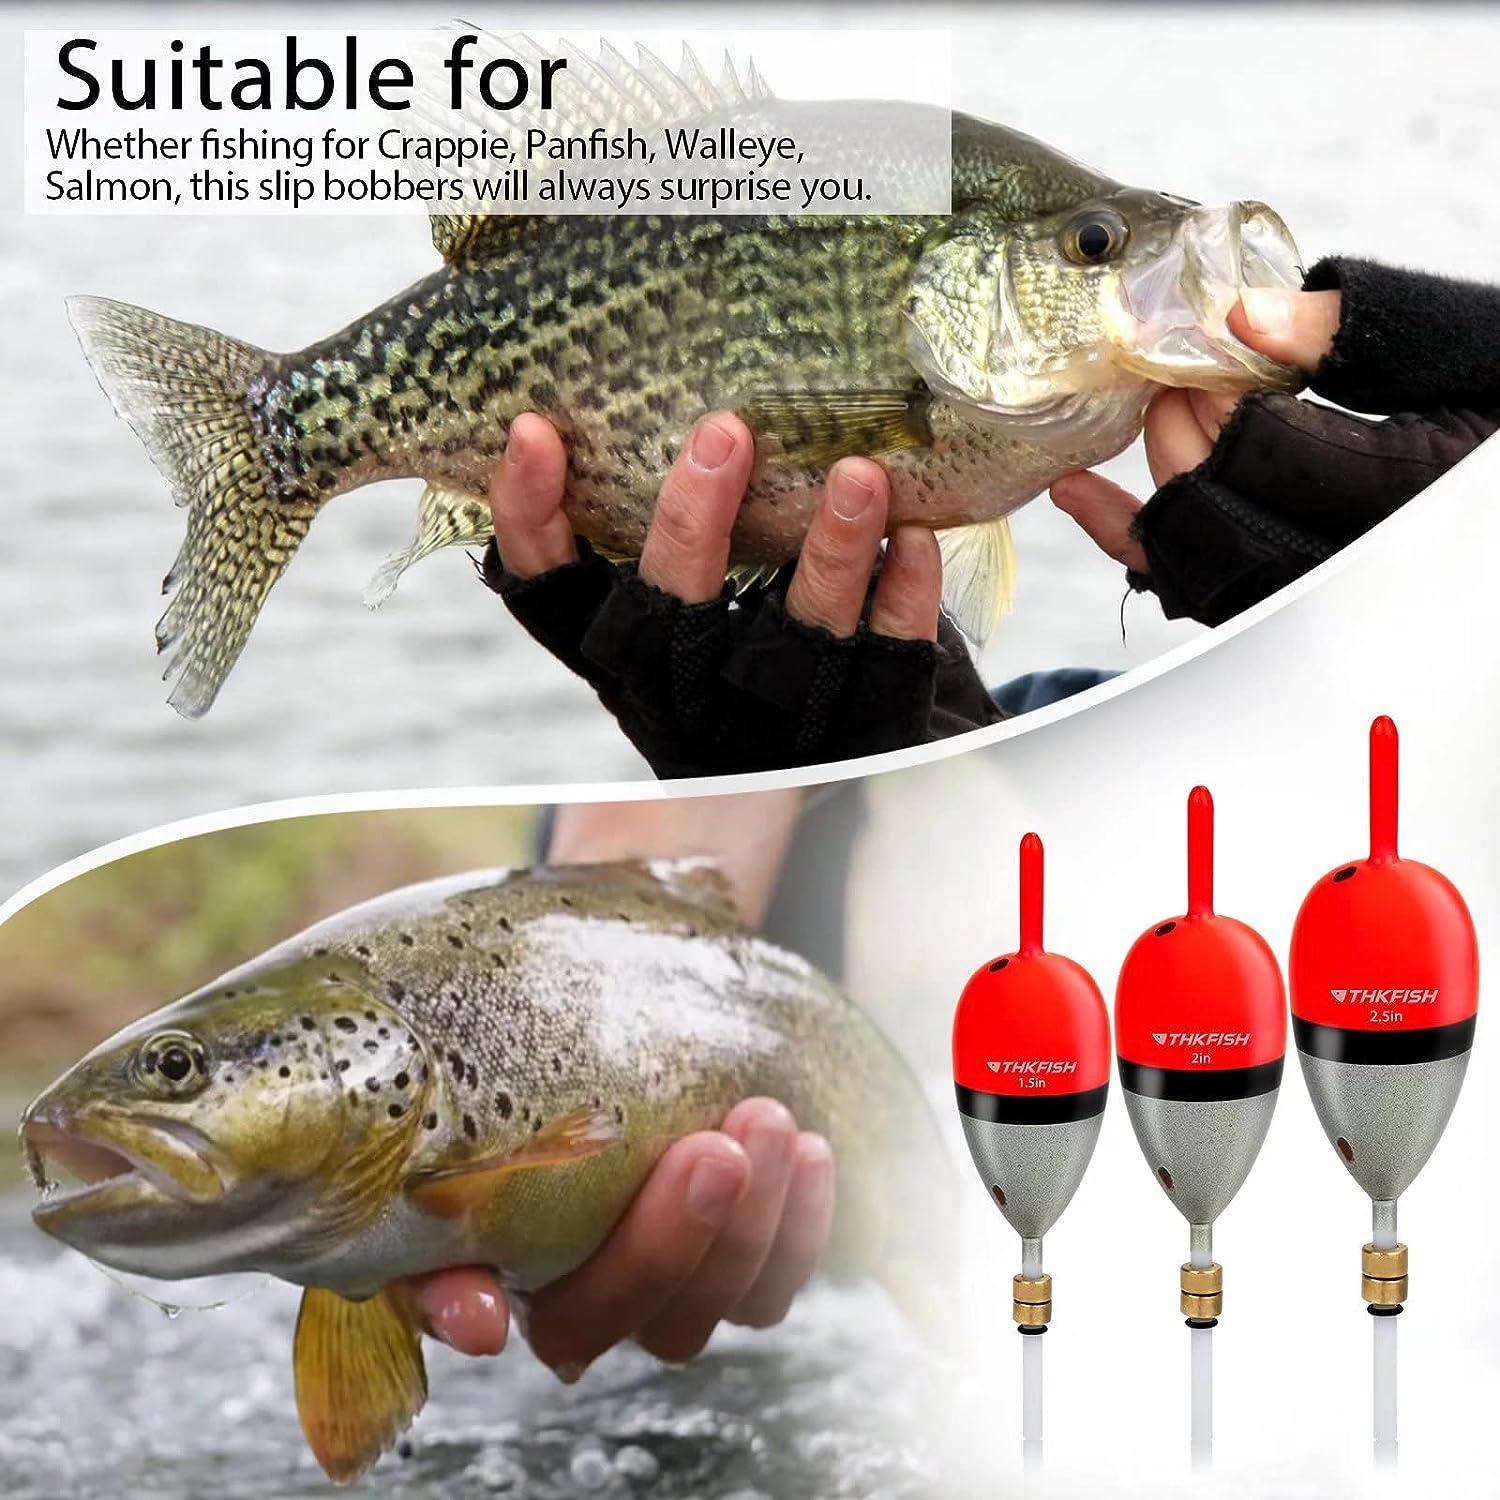 Fishing Bobbers 1-6 Pack/Pcs, Fishing Gear, Fishing Accessories, Trout  Lures, Fishing Tackle Box, Slip Bobbers and Slip Bobbers for Crappie  Fishing